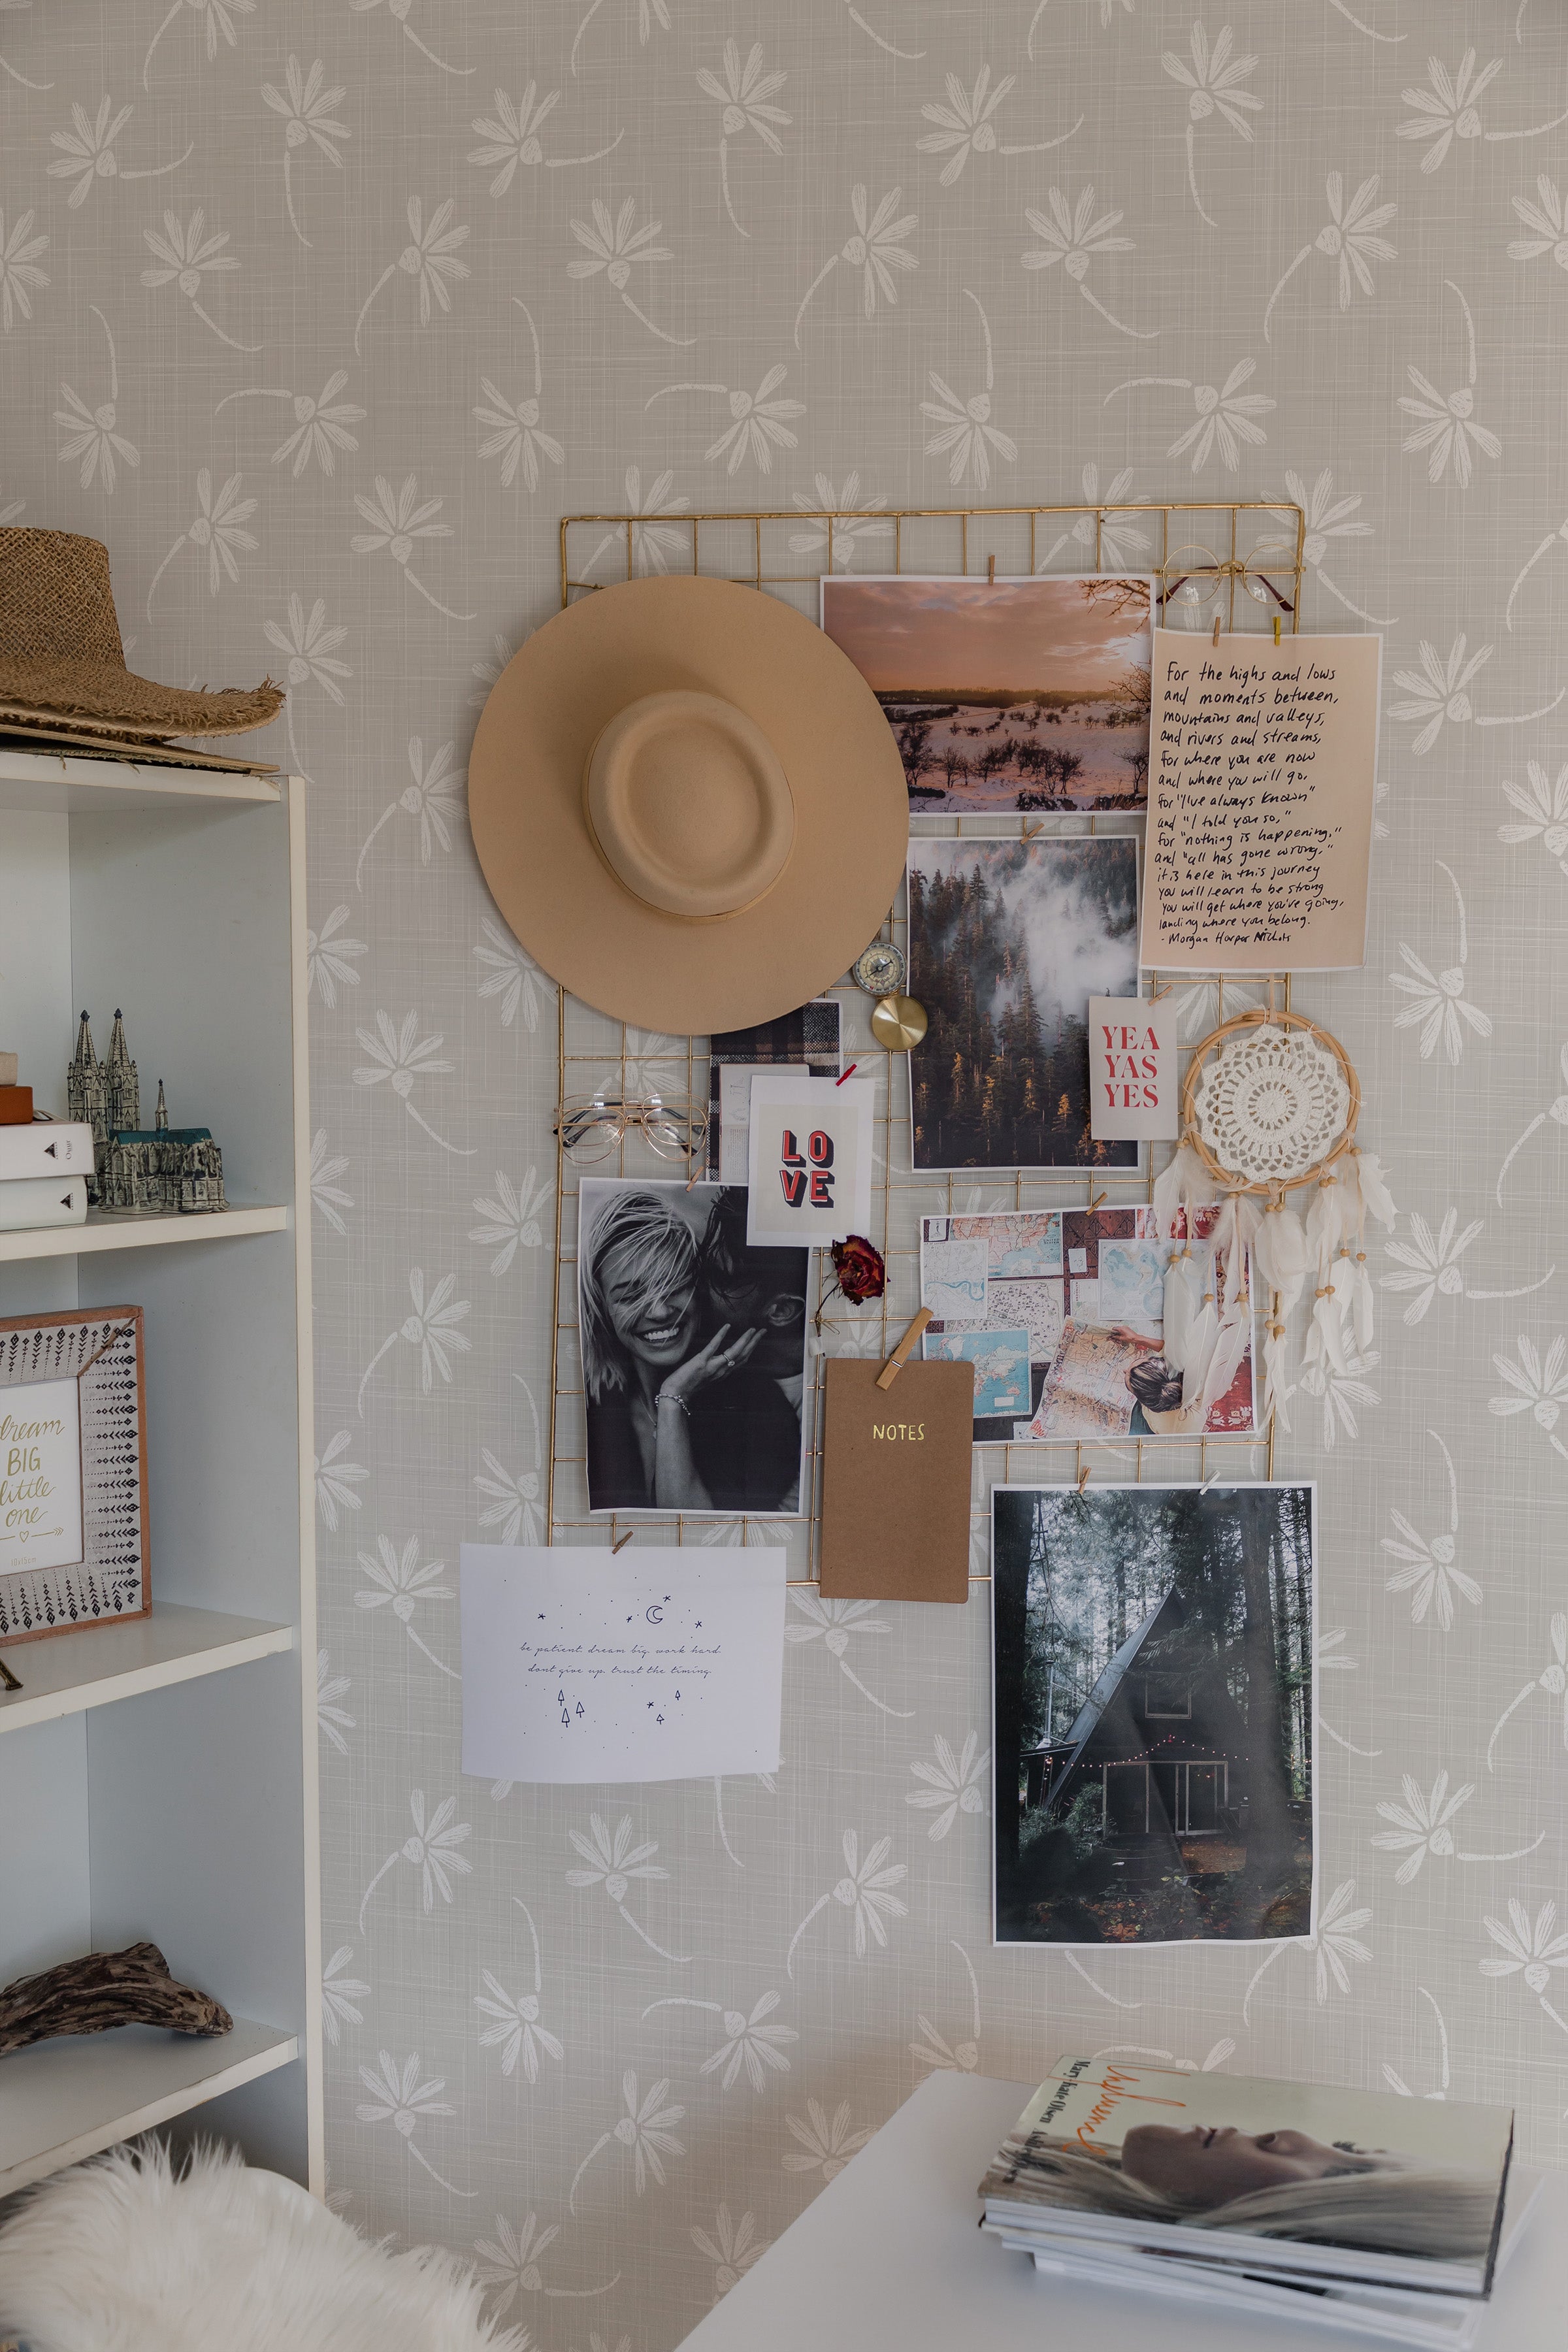 The "French Linen Floral Wallpaper" in a bedroom setting, adorned with personal photos, notes, and a dreamcatcher, creates a personalized and cozy atmosphere. The wallpaper's gentle pattern pairs beautifully with the room’s soft furnishings and rustic decor elements.